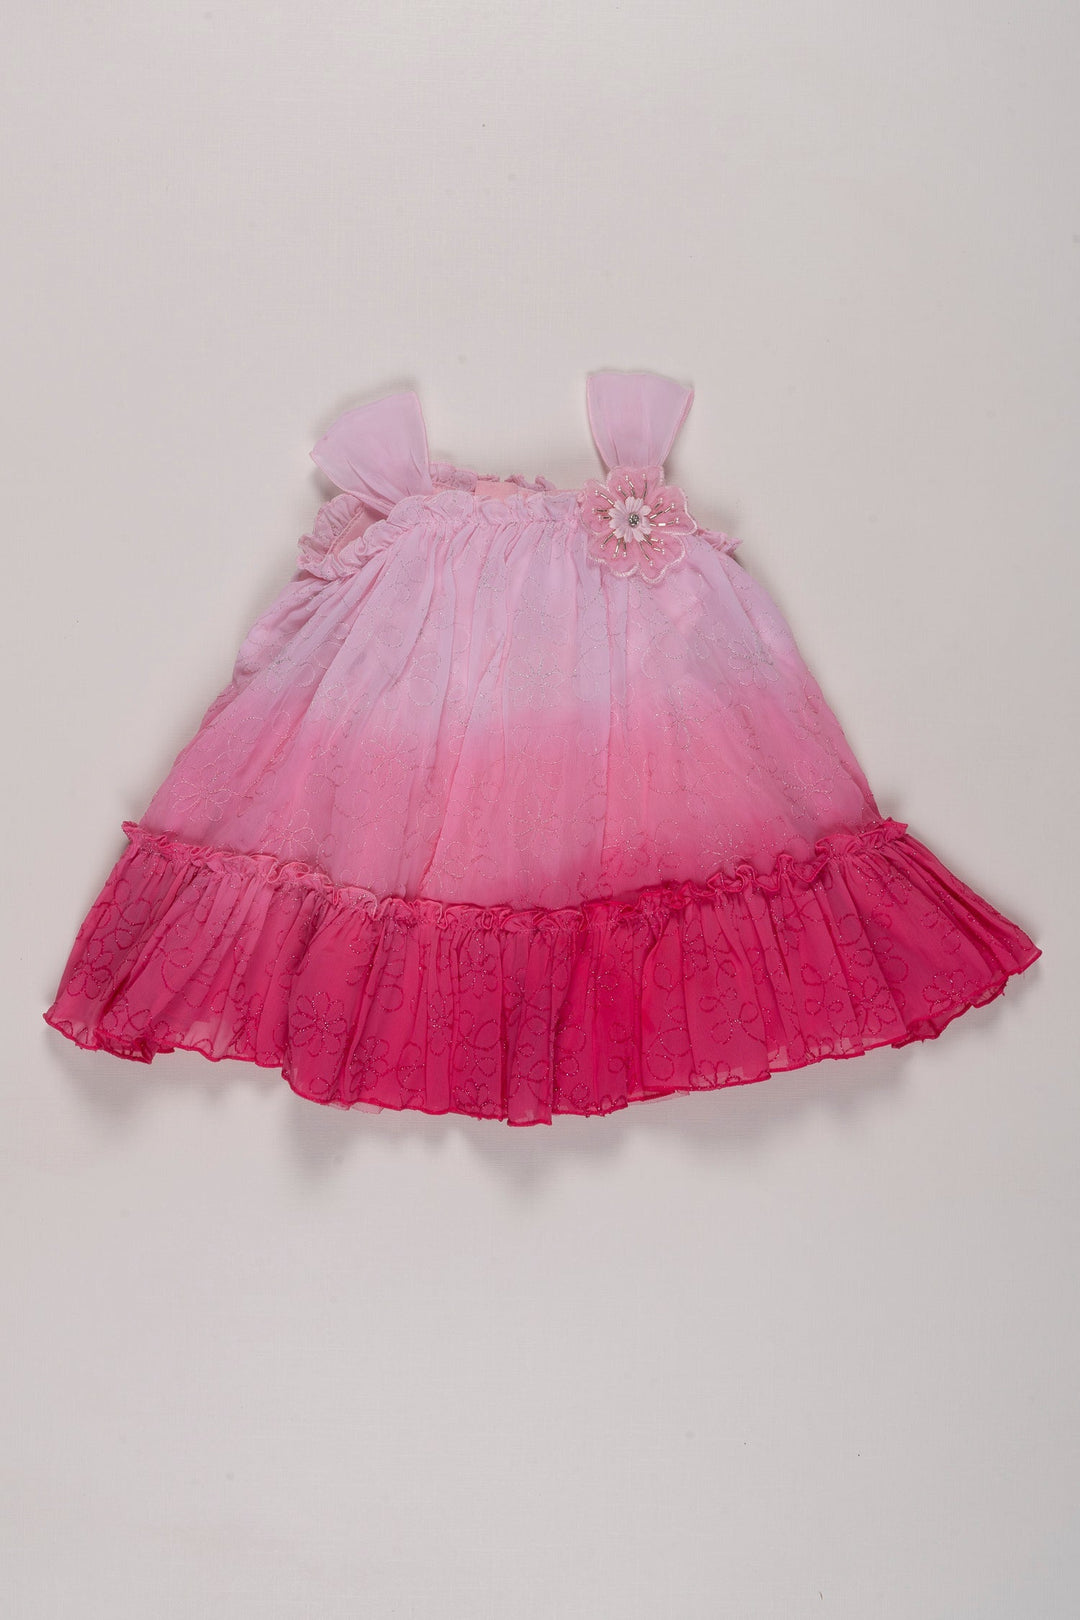 The Nesavu Girls Fancy Frock Girls Pink Princess Frock with Sparkling Tulle - Enchanted Evening Wear Nesavu 16 (1Y) / Pink GFC1225A-16 Girls Pink Party Frock | Sparkly Tulle Dress for Kids | The Nesavu